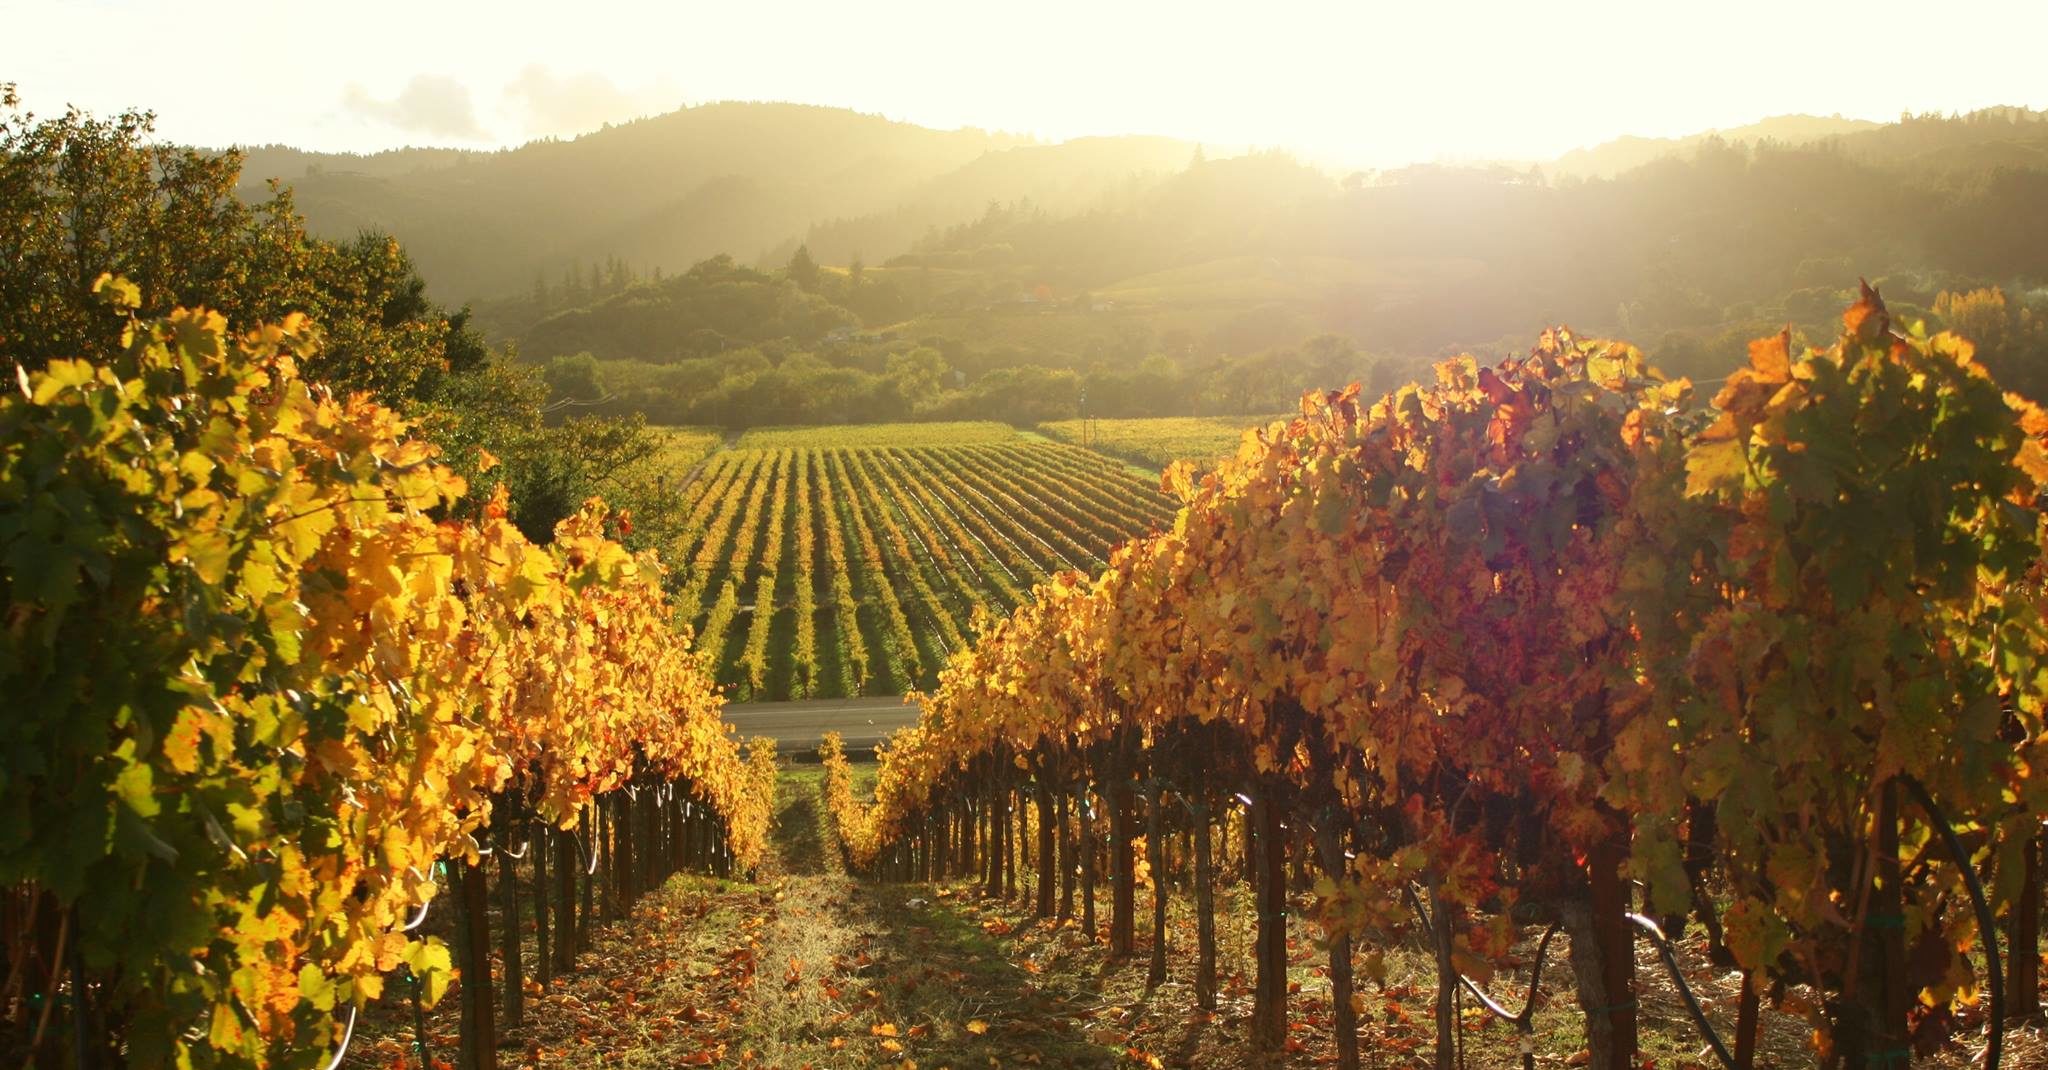 Vineyard Homes for Sale in Sonoma CA by Latife Hayson